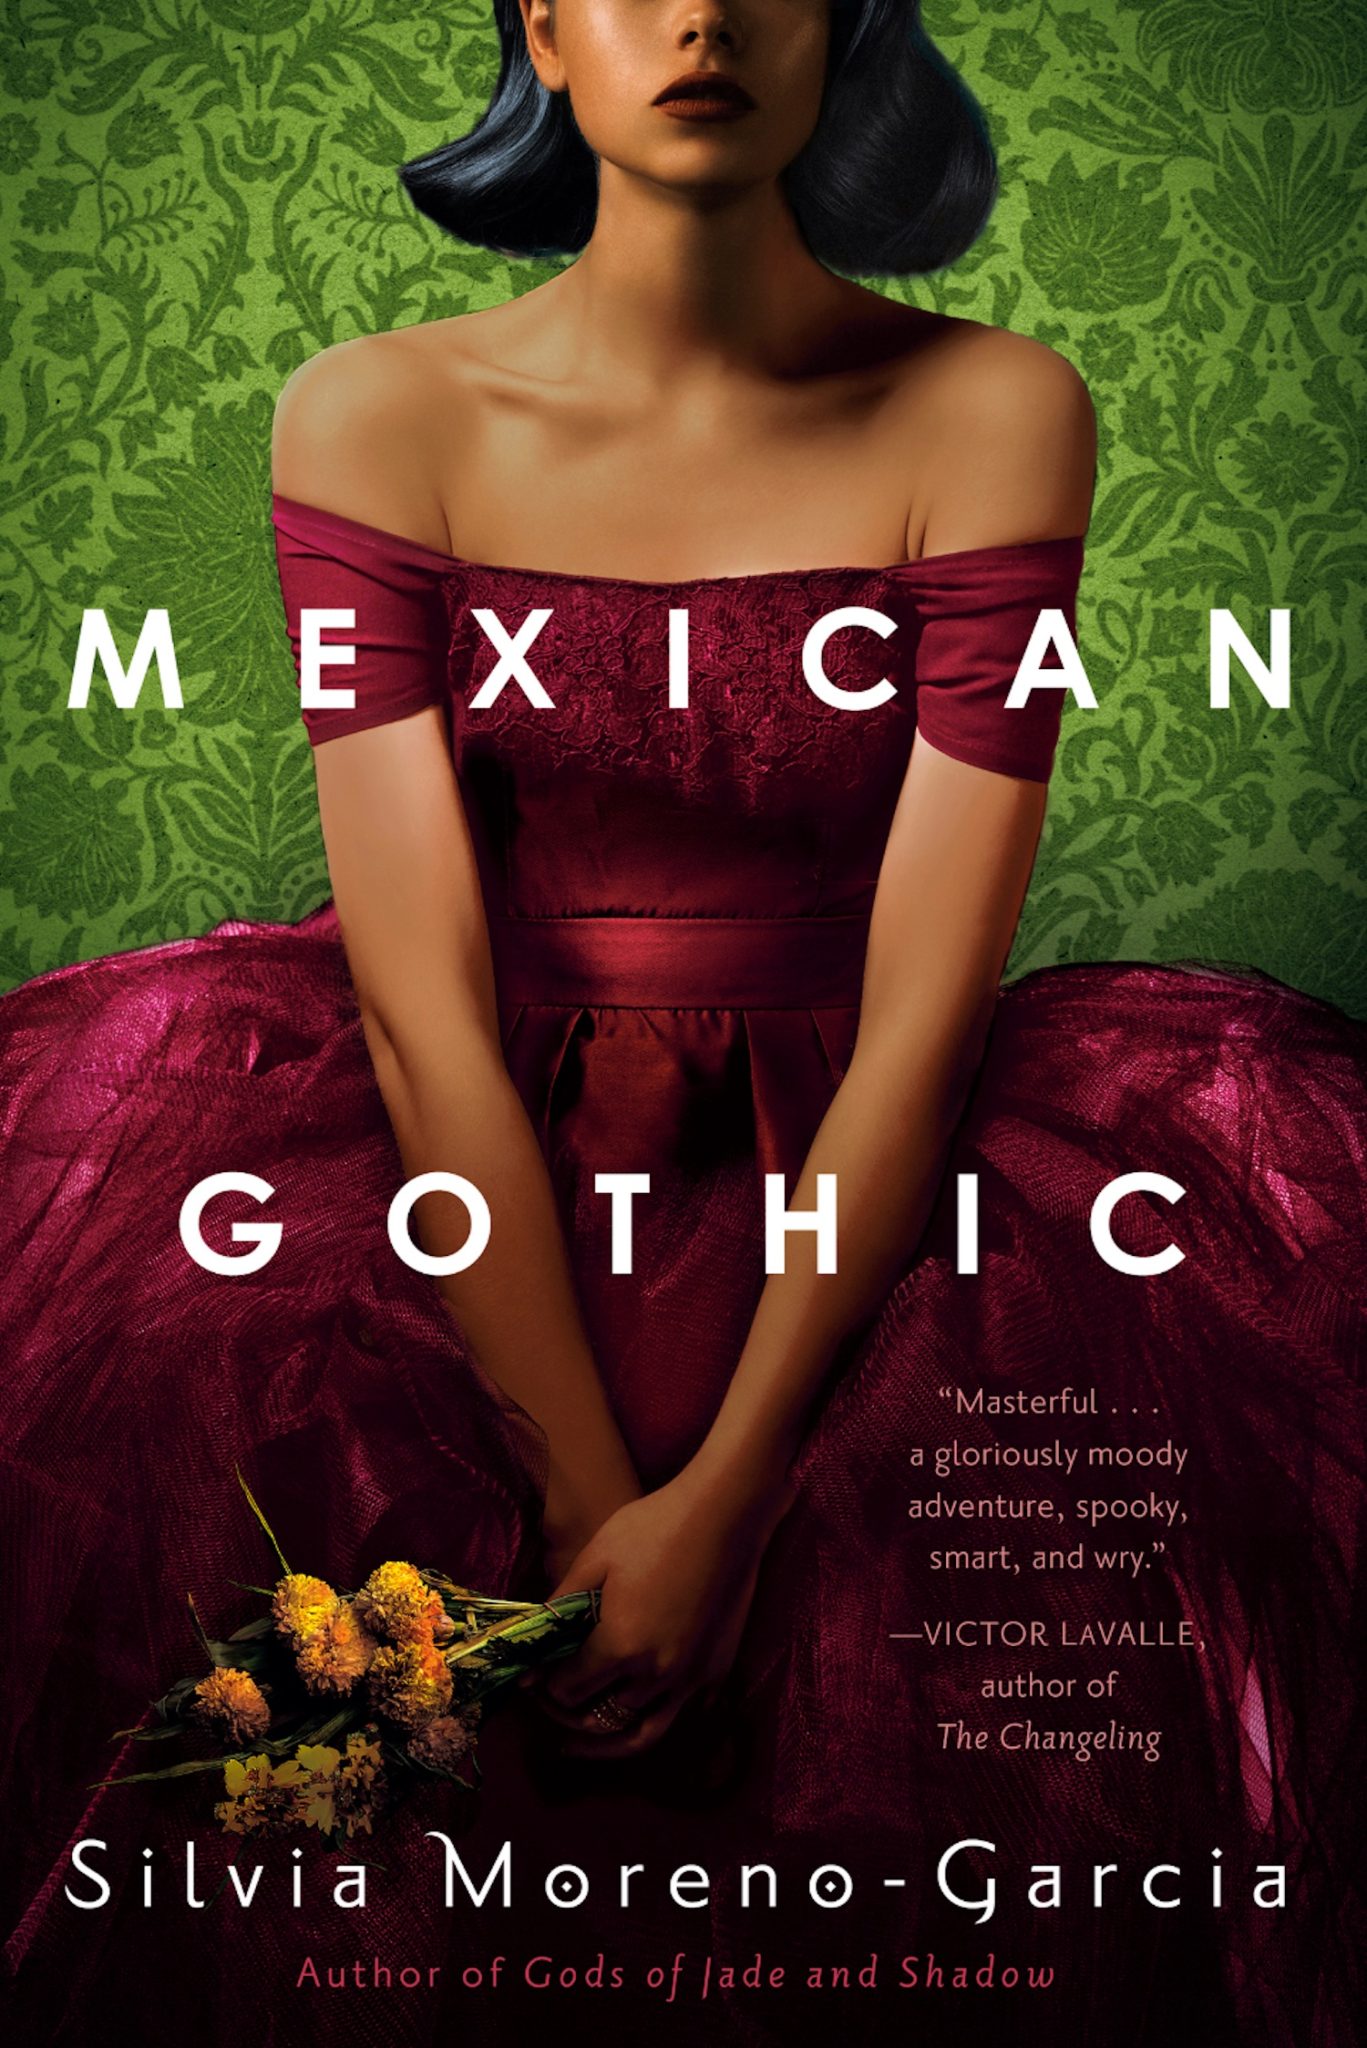 book review of mexican gothic